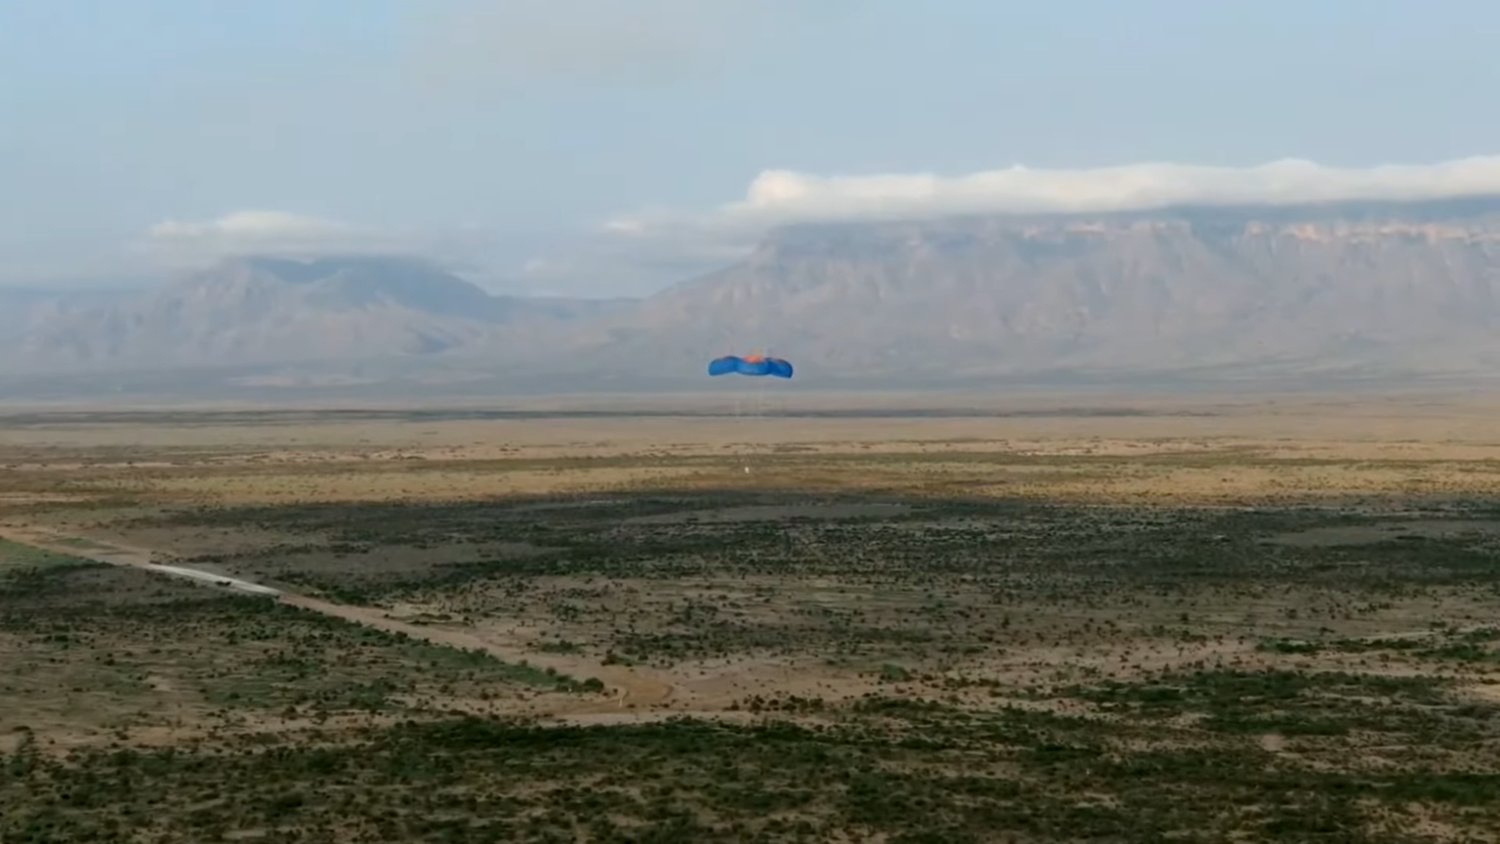 The New Shepard capsule lands softly in the West Texas desert returning from a historic flight setting  several records including that of the first commercial vehicle to fly paying customers, including payloads and astronauts, to space and back.